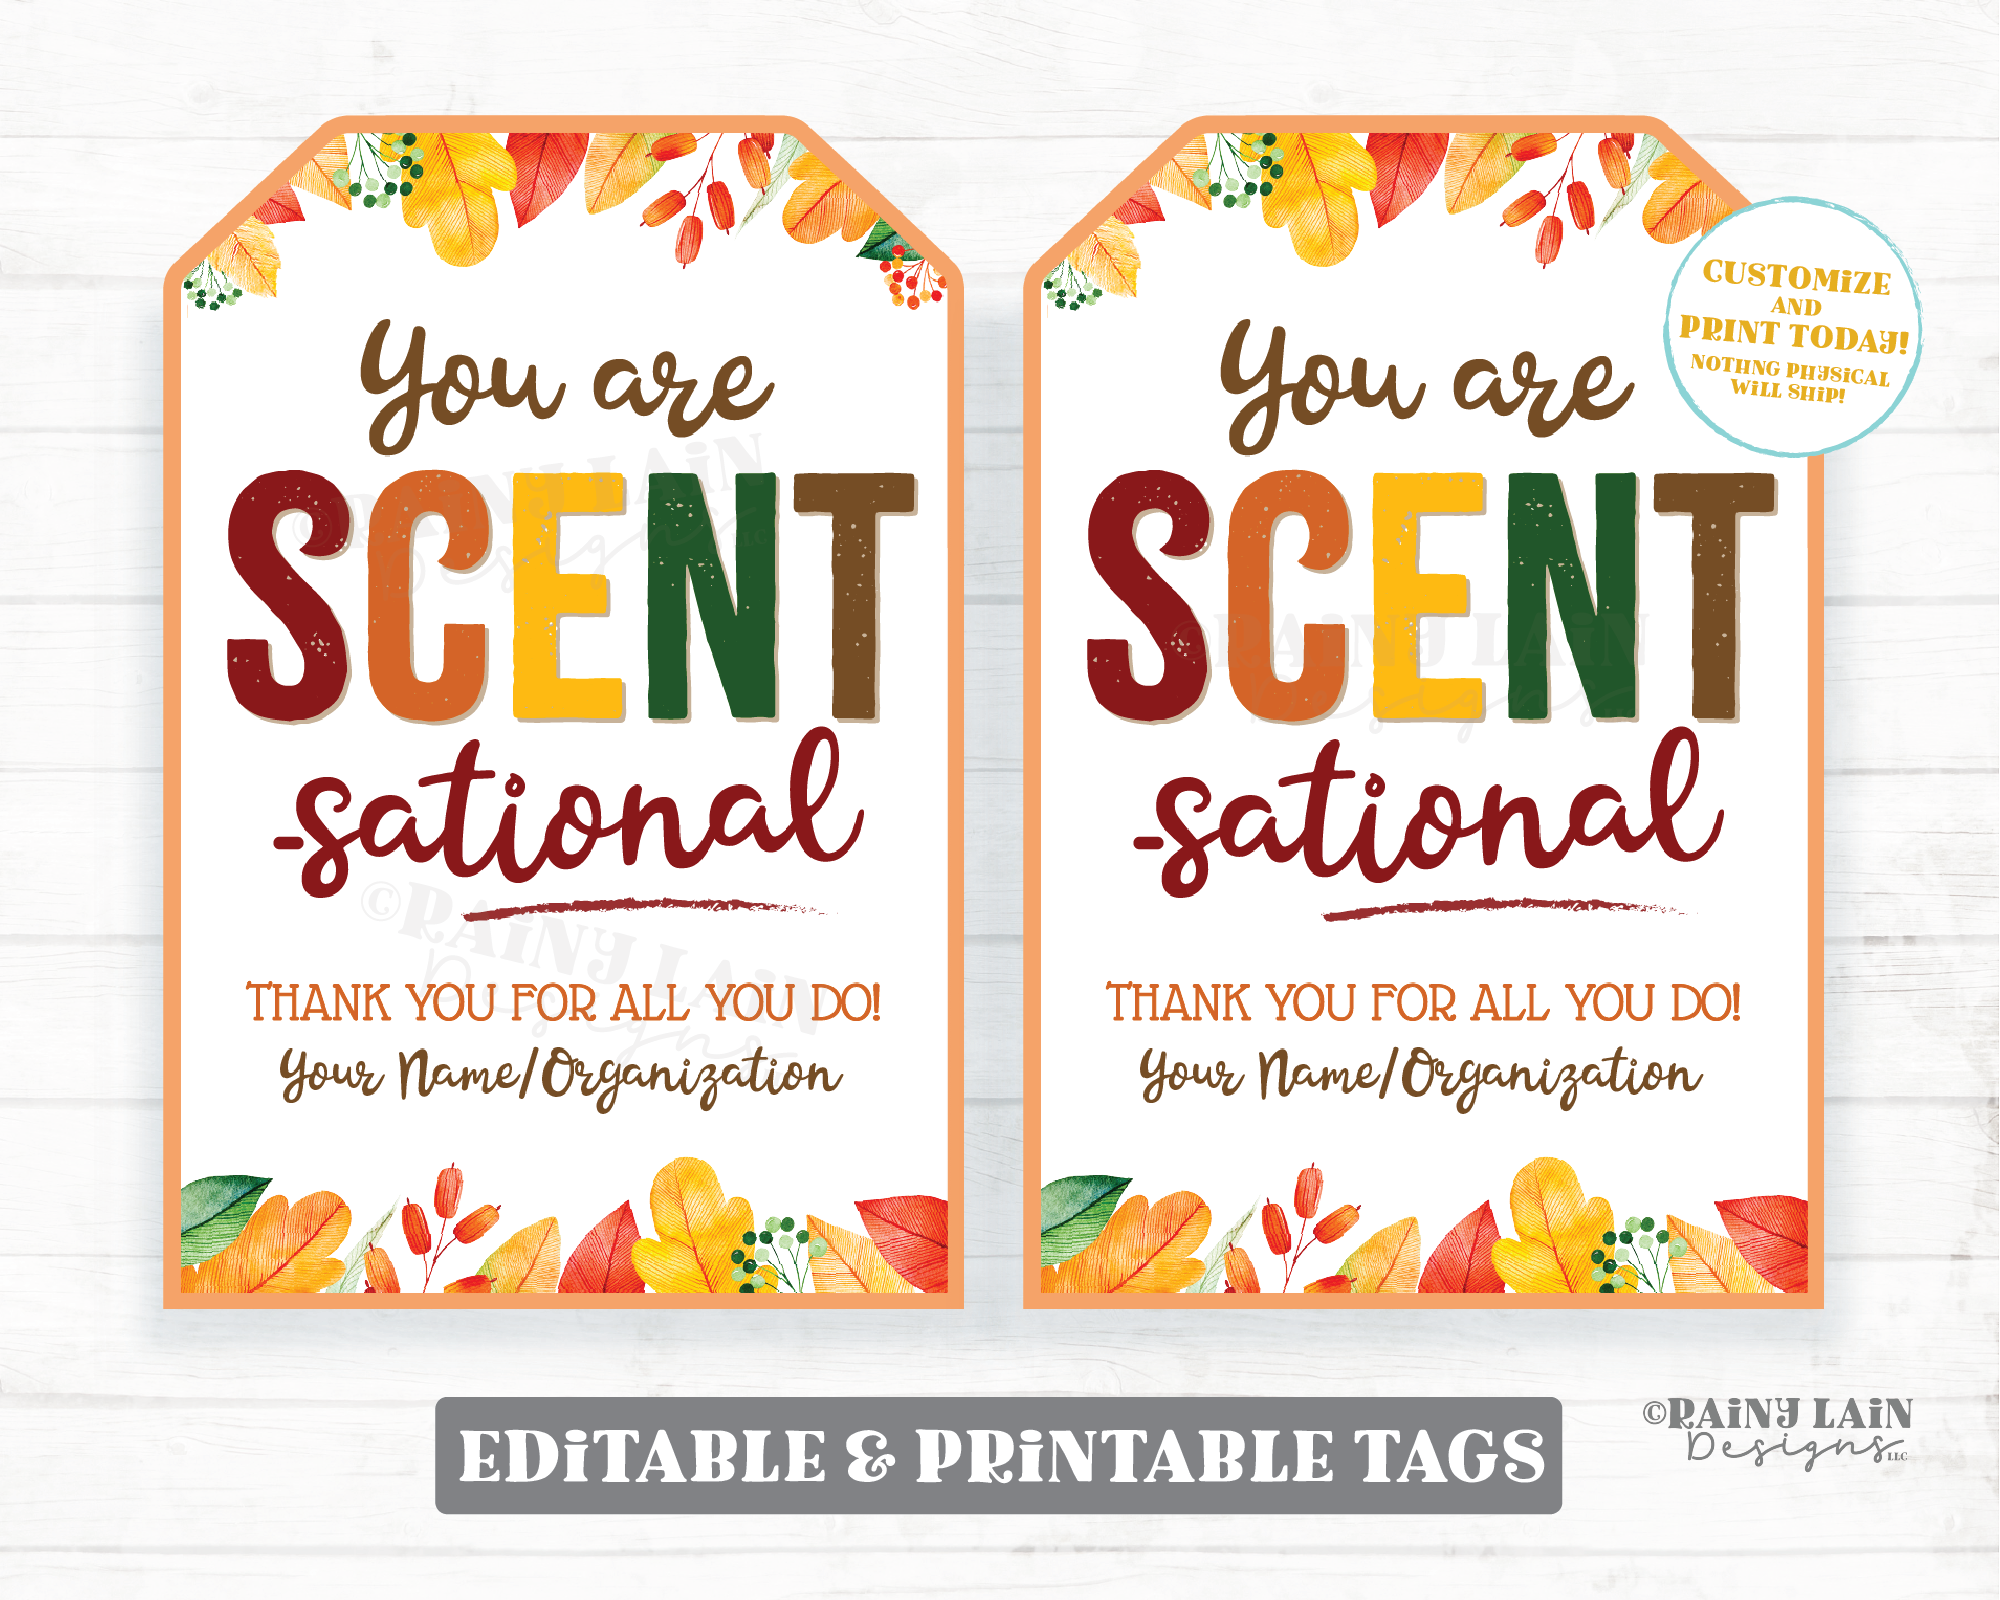 You are Scent-sational Tag Fall Autumn Thanksgiving Gift Staff Appreciation Teacher Thank you Potpourri Candle Handmade Bath Essential Oil